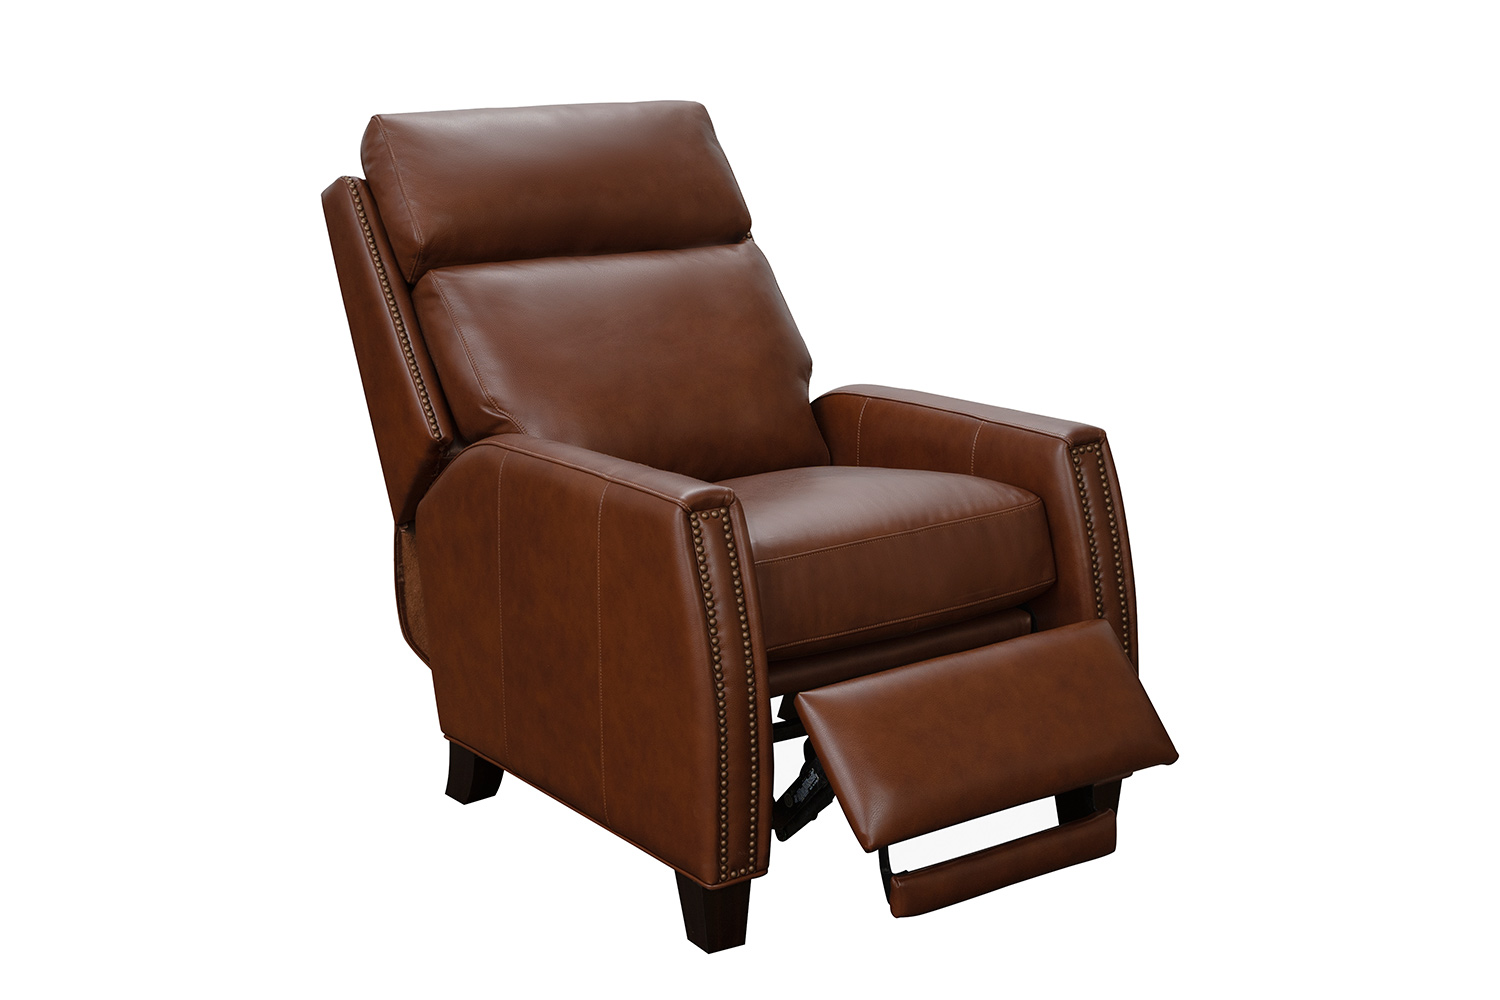 Barcalounger Anaheim Big and Tall Recliner Chair - Ashford Bitters/All Leather